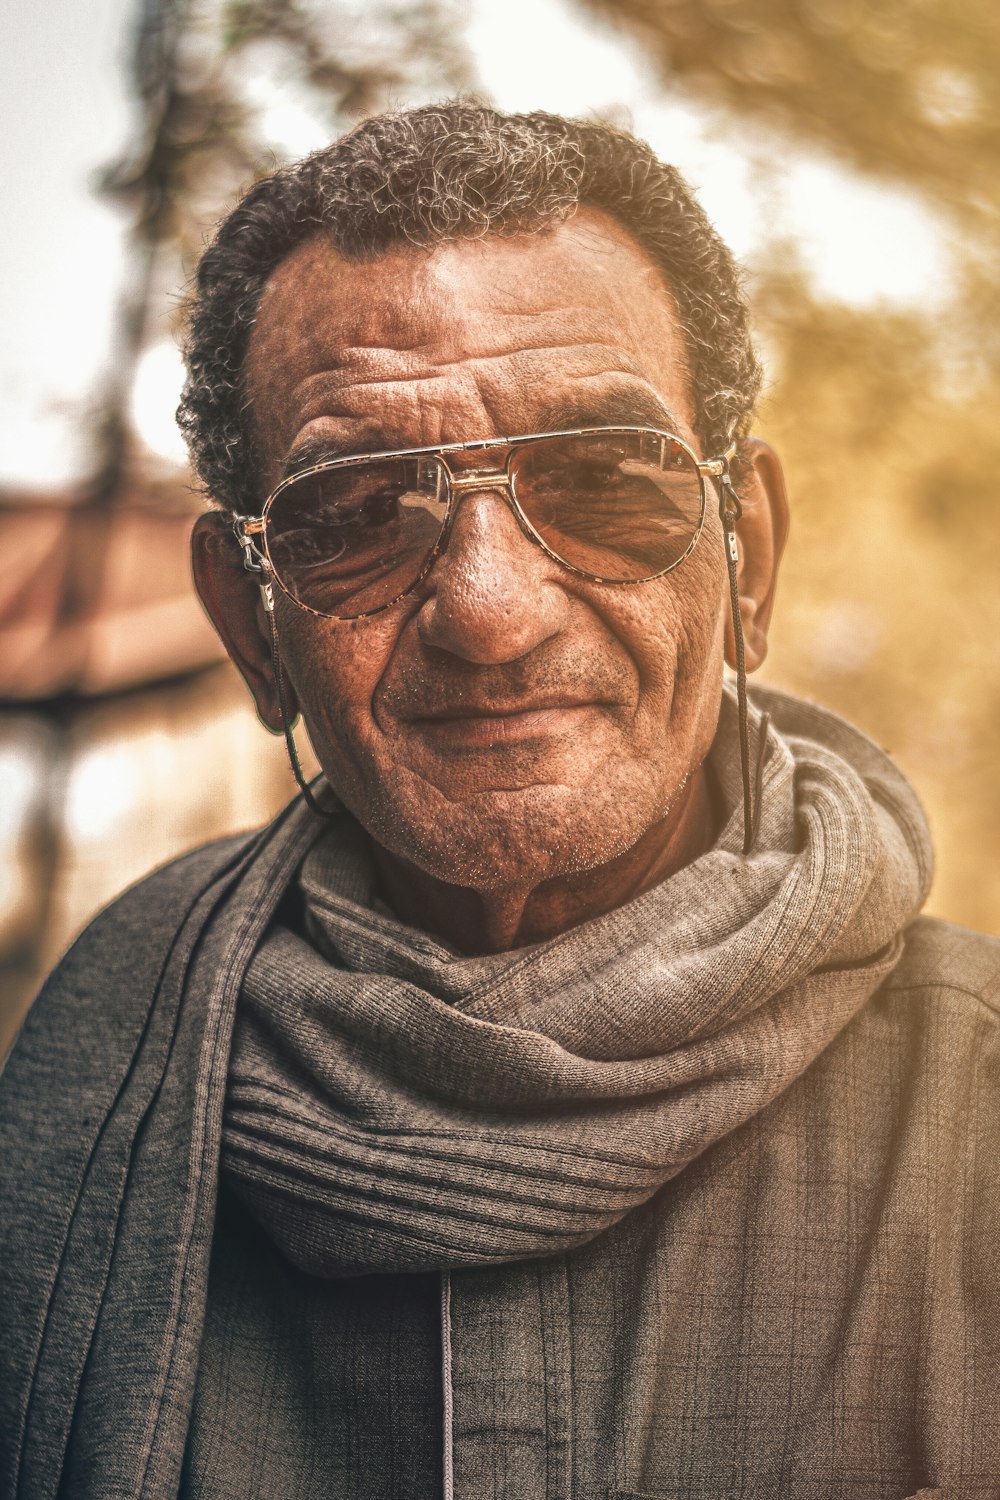 a man wearing sunglasses and a scarf